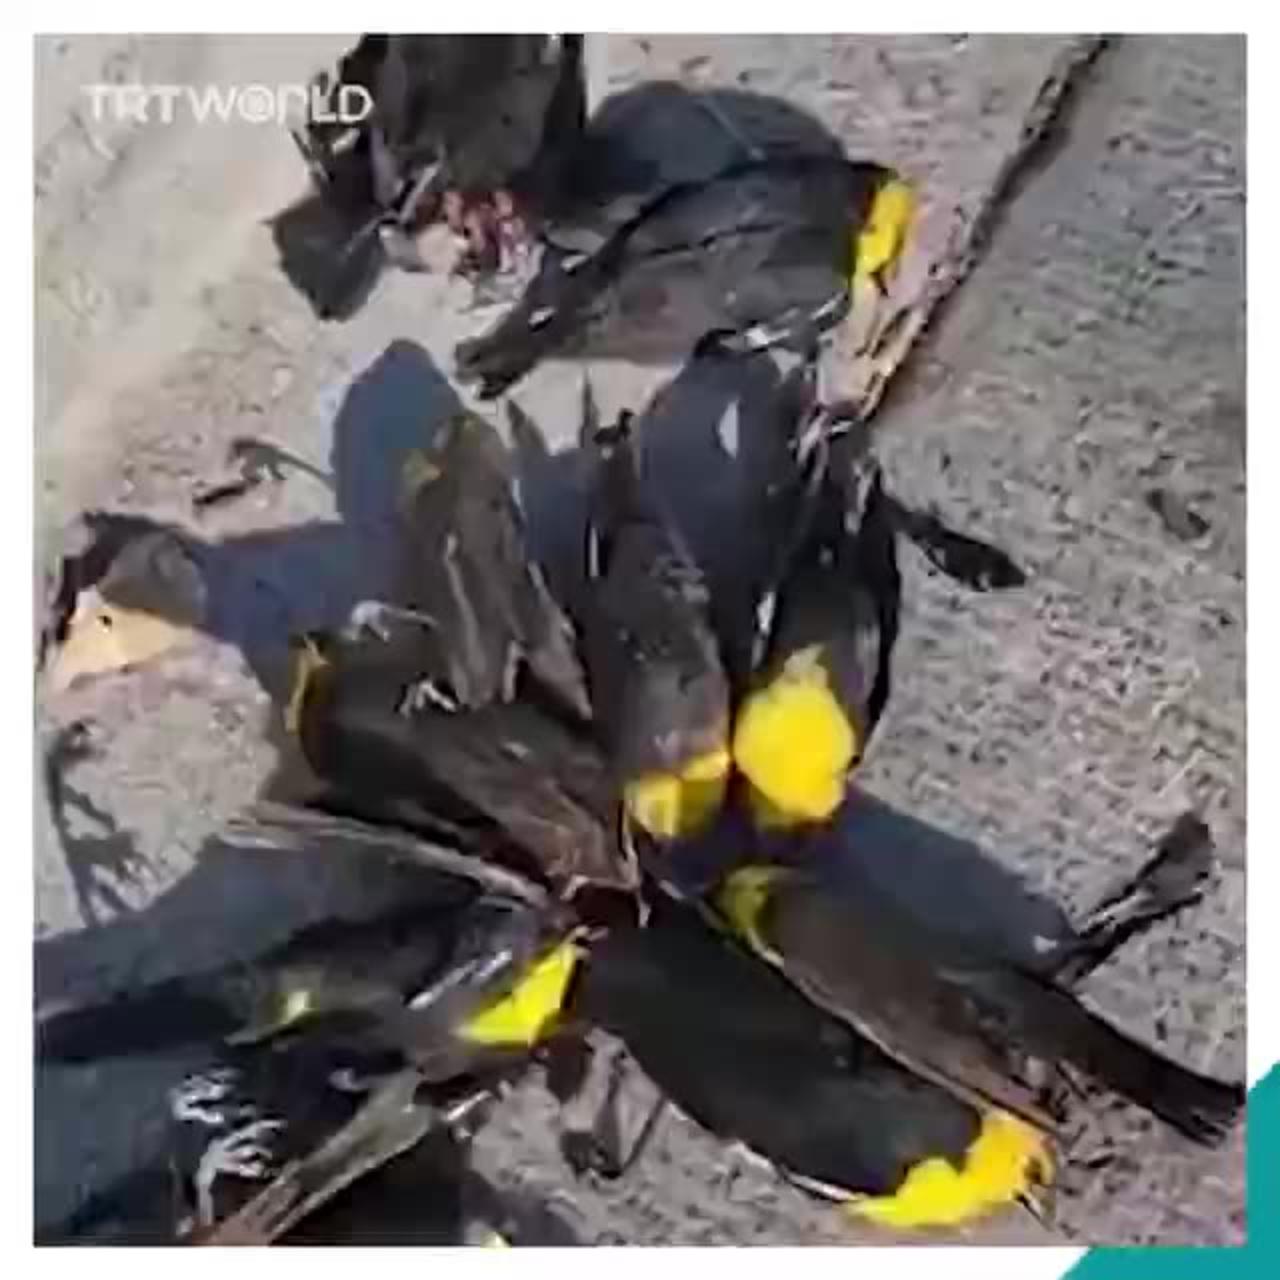 In Mexico, a large part of a flock of birds suddenly died while in flight, for no apparent reason